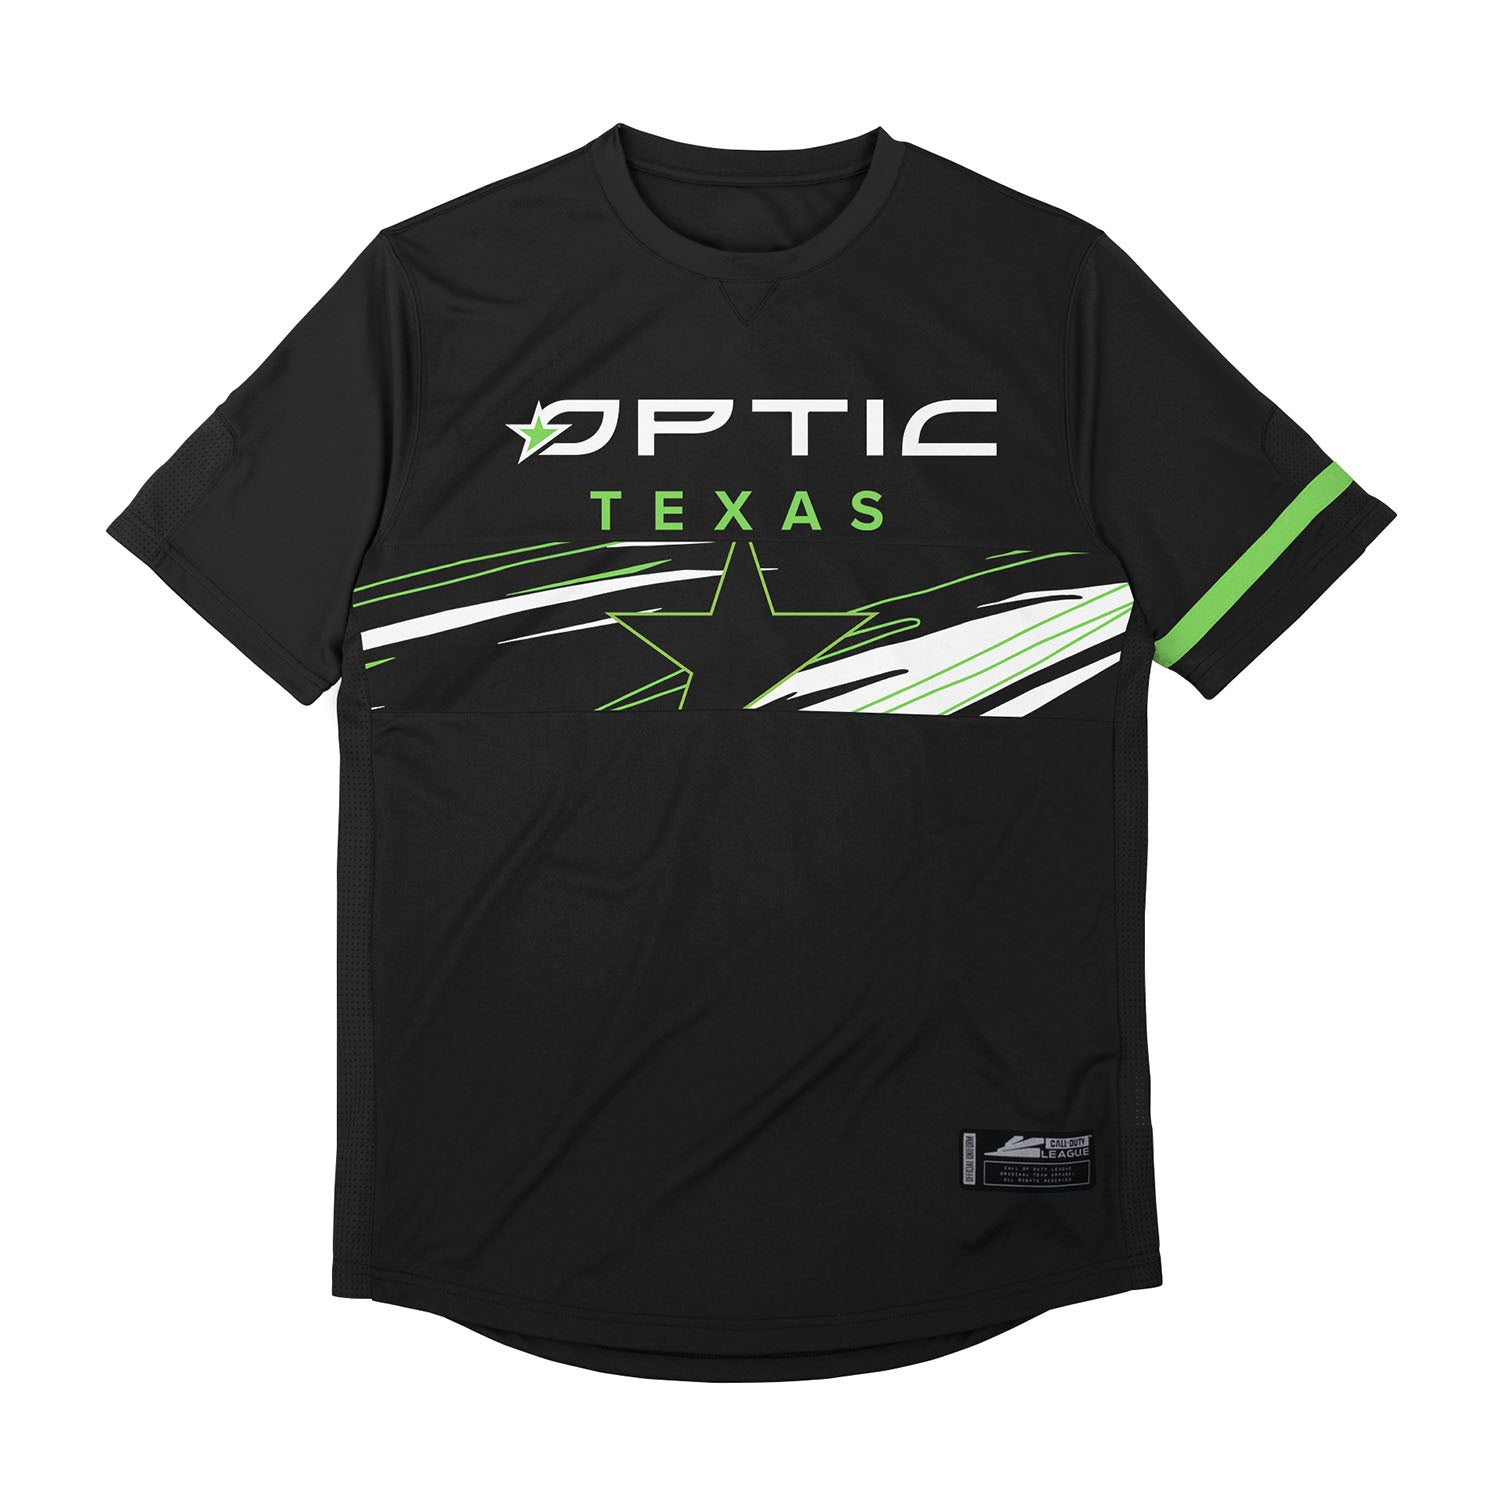 OpTic Texas Black Jersey - Front View